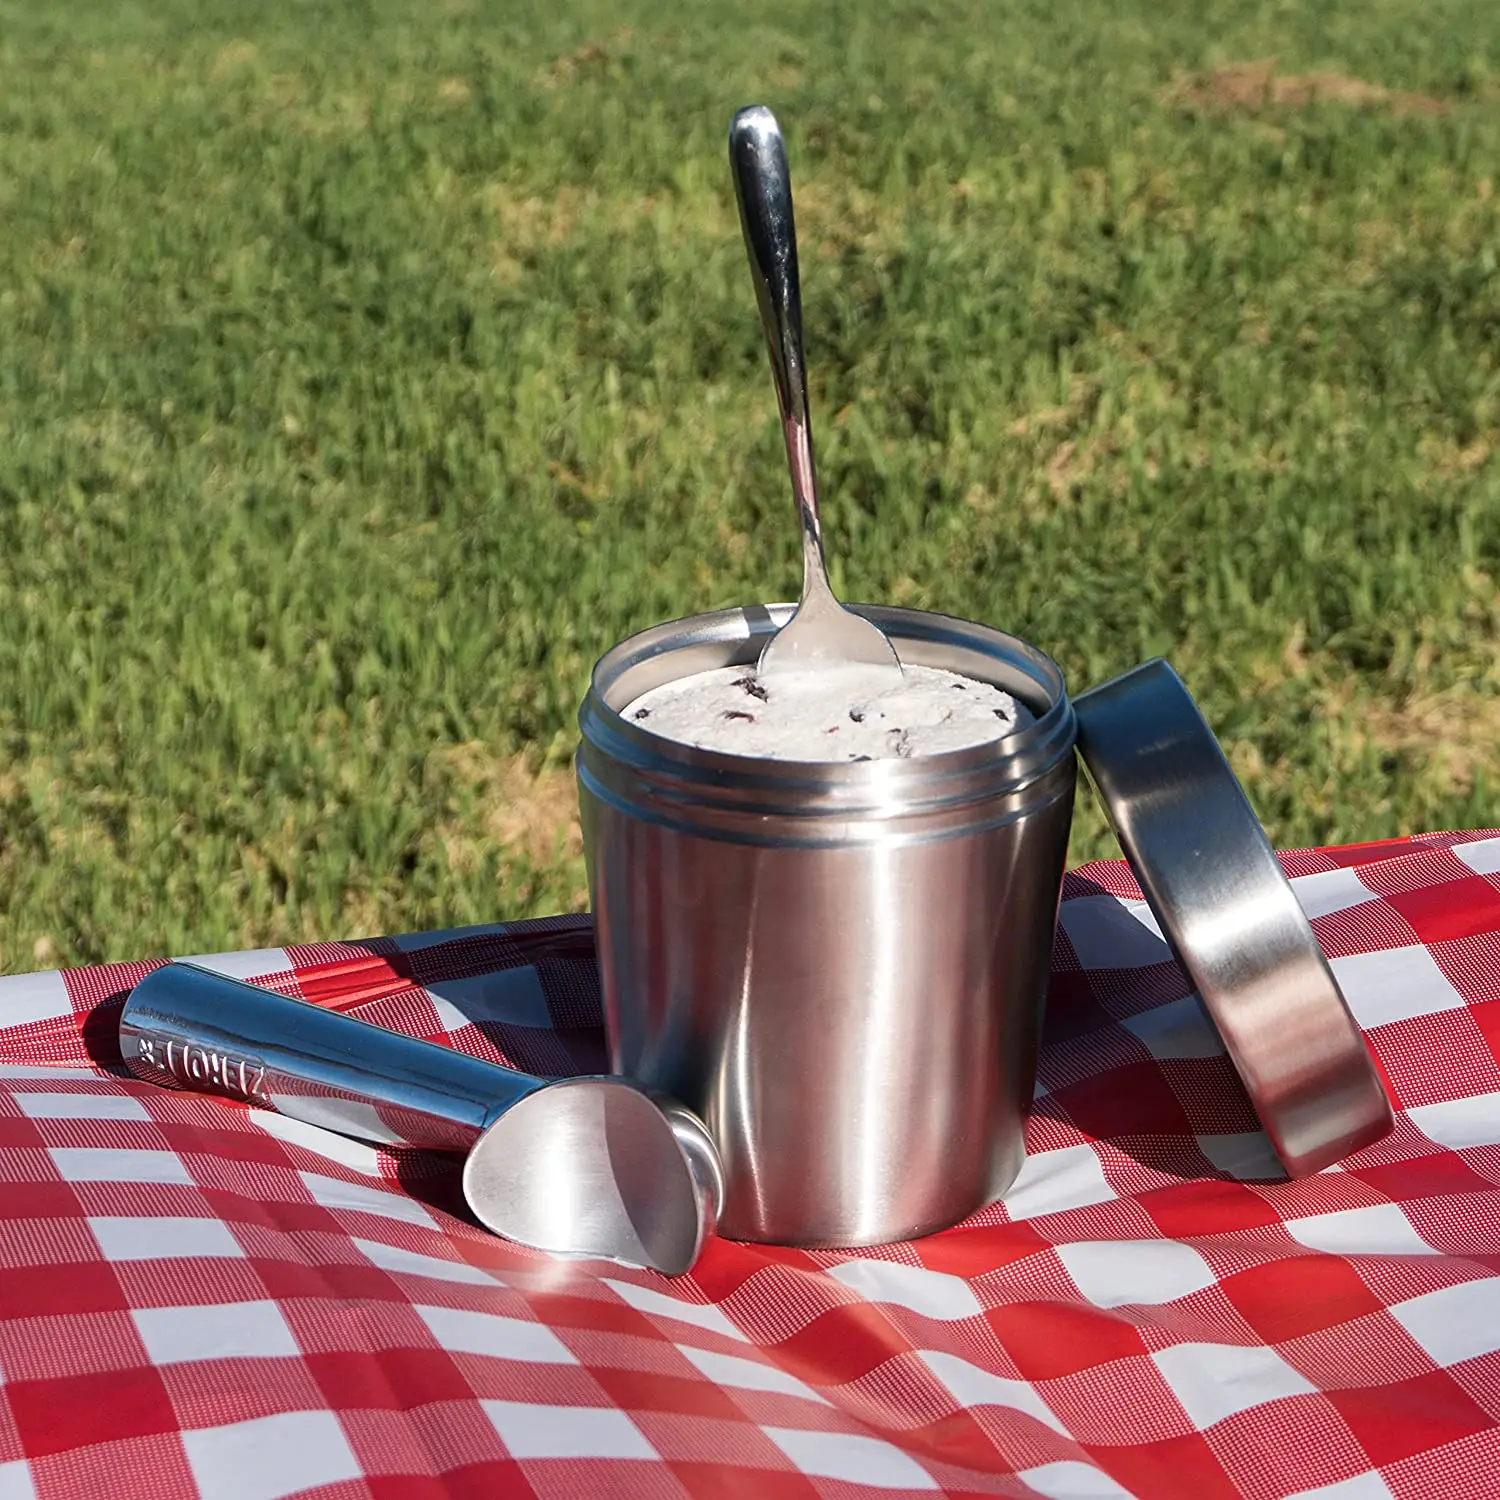  Ice Cream Cooler Container  Stainless Steel Pint Thermos  Vacuum Insulated Double Wall Reusuable Coozie Sustainable Food Storage -  Great for Picnics, Camping, Beach - Keeps Frozen for Hours : Home & Kitchen